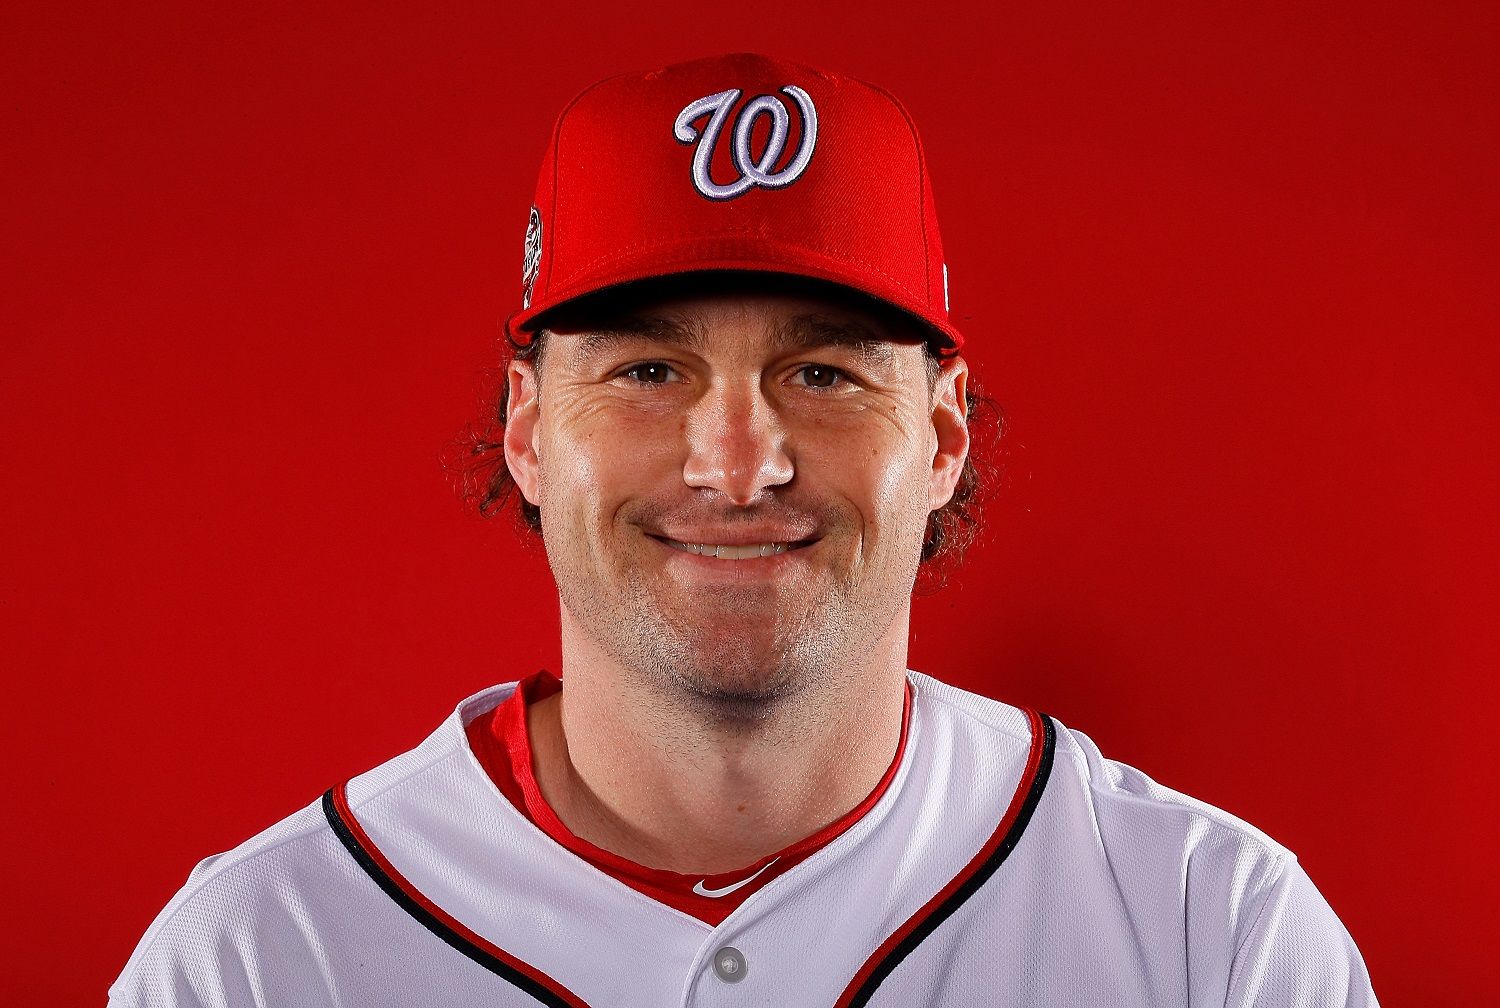 WEST PALM BEACH, FL - FEBRUARY 22:  Daniel Murphy #20 of the Washington Nationals poses for a photo during photo days at The Ballpark of the Palm Beaches on February 22, 2018 in West Palm Beach, Florida.  (Photo by Kevin C. Cox/Getty Images)